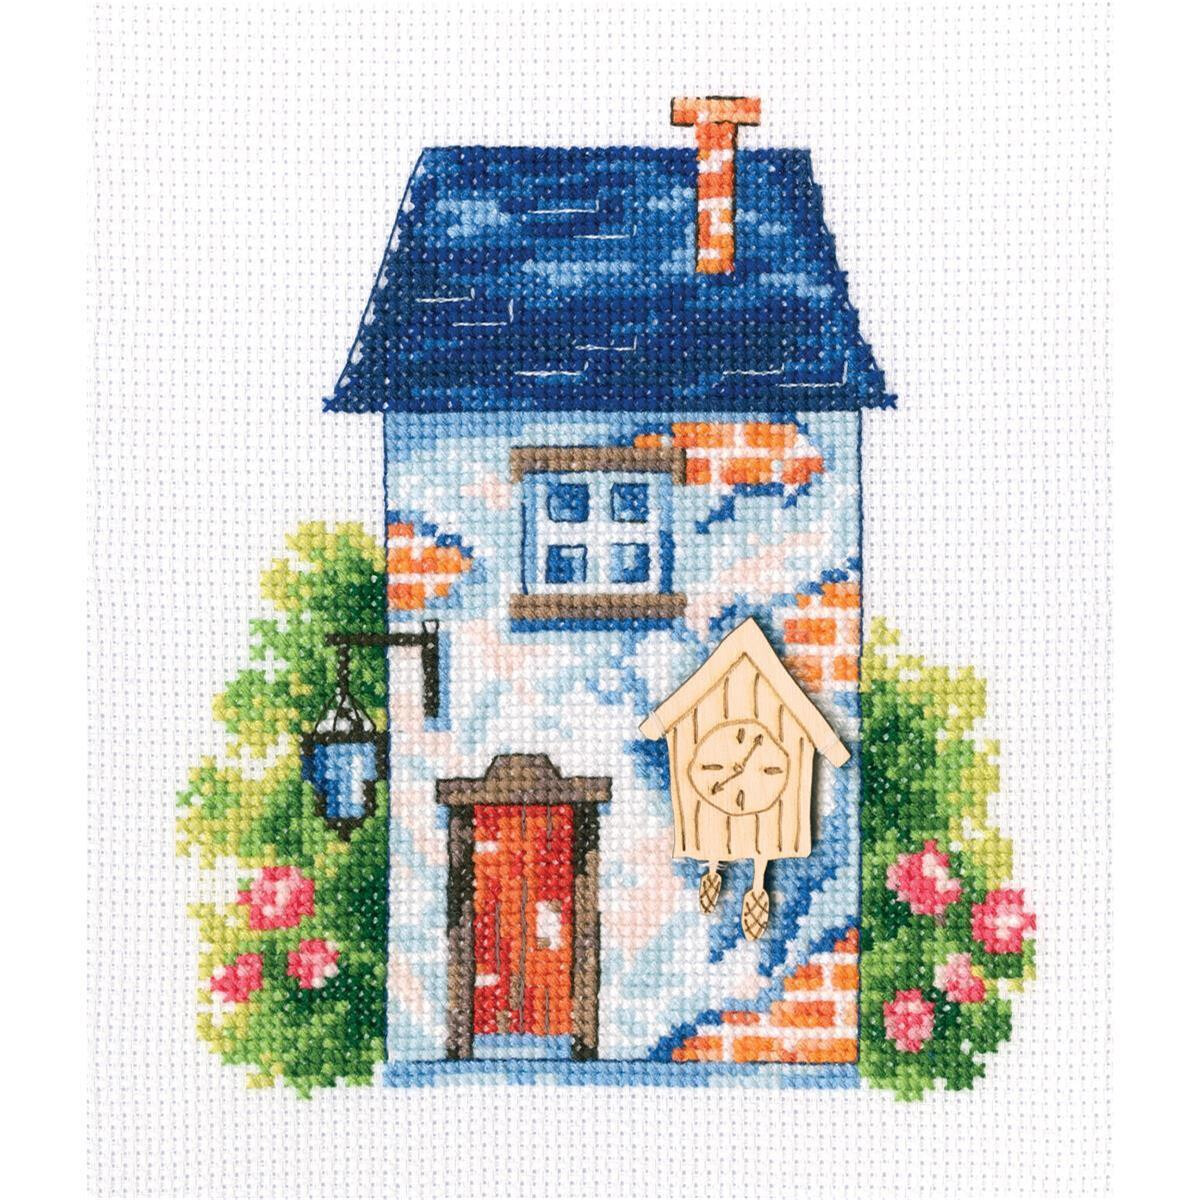 RTO counted Cross Stitch Kit with plywood form "My...